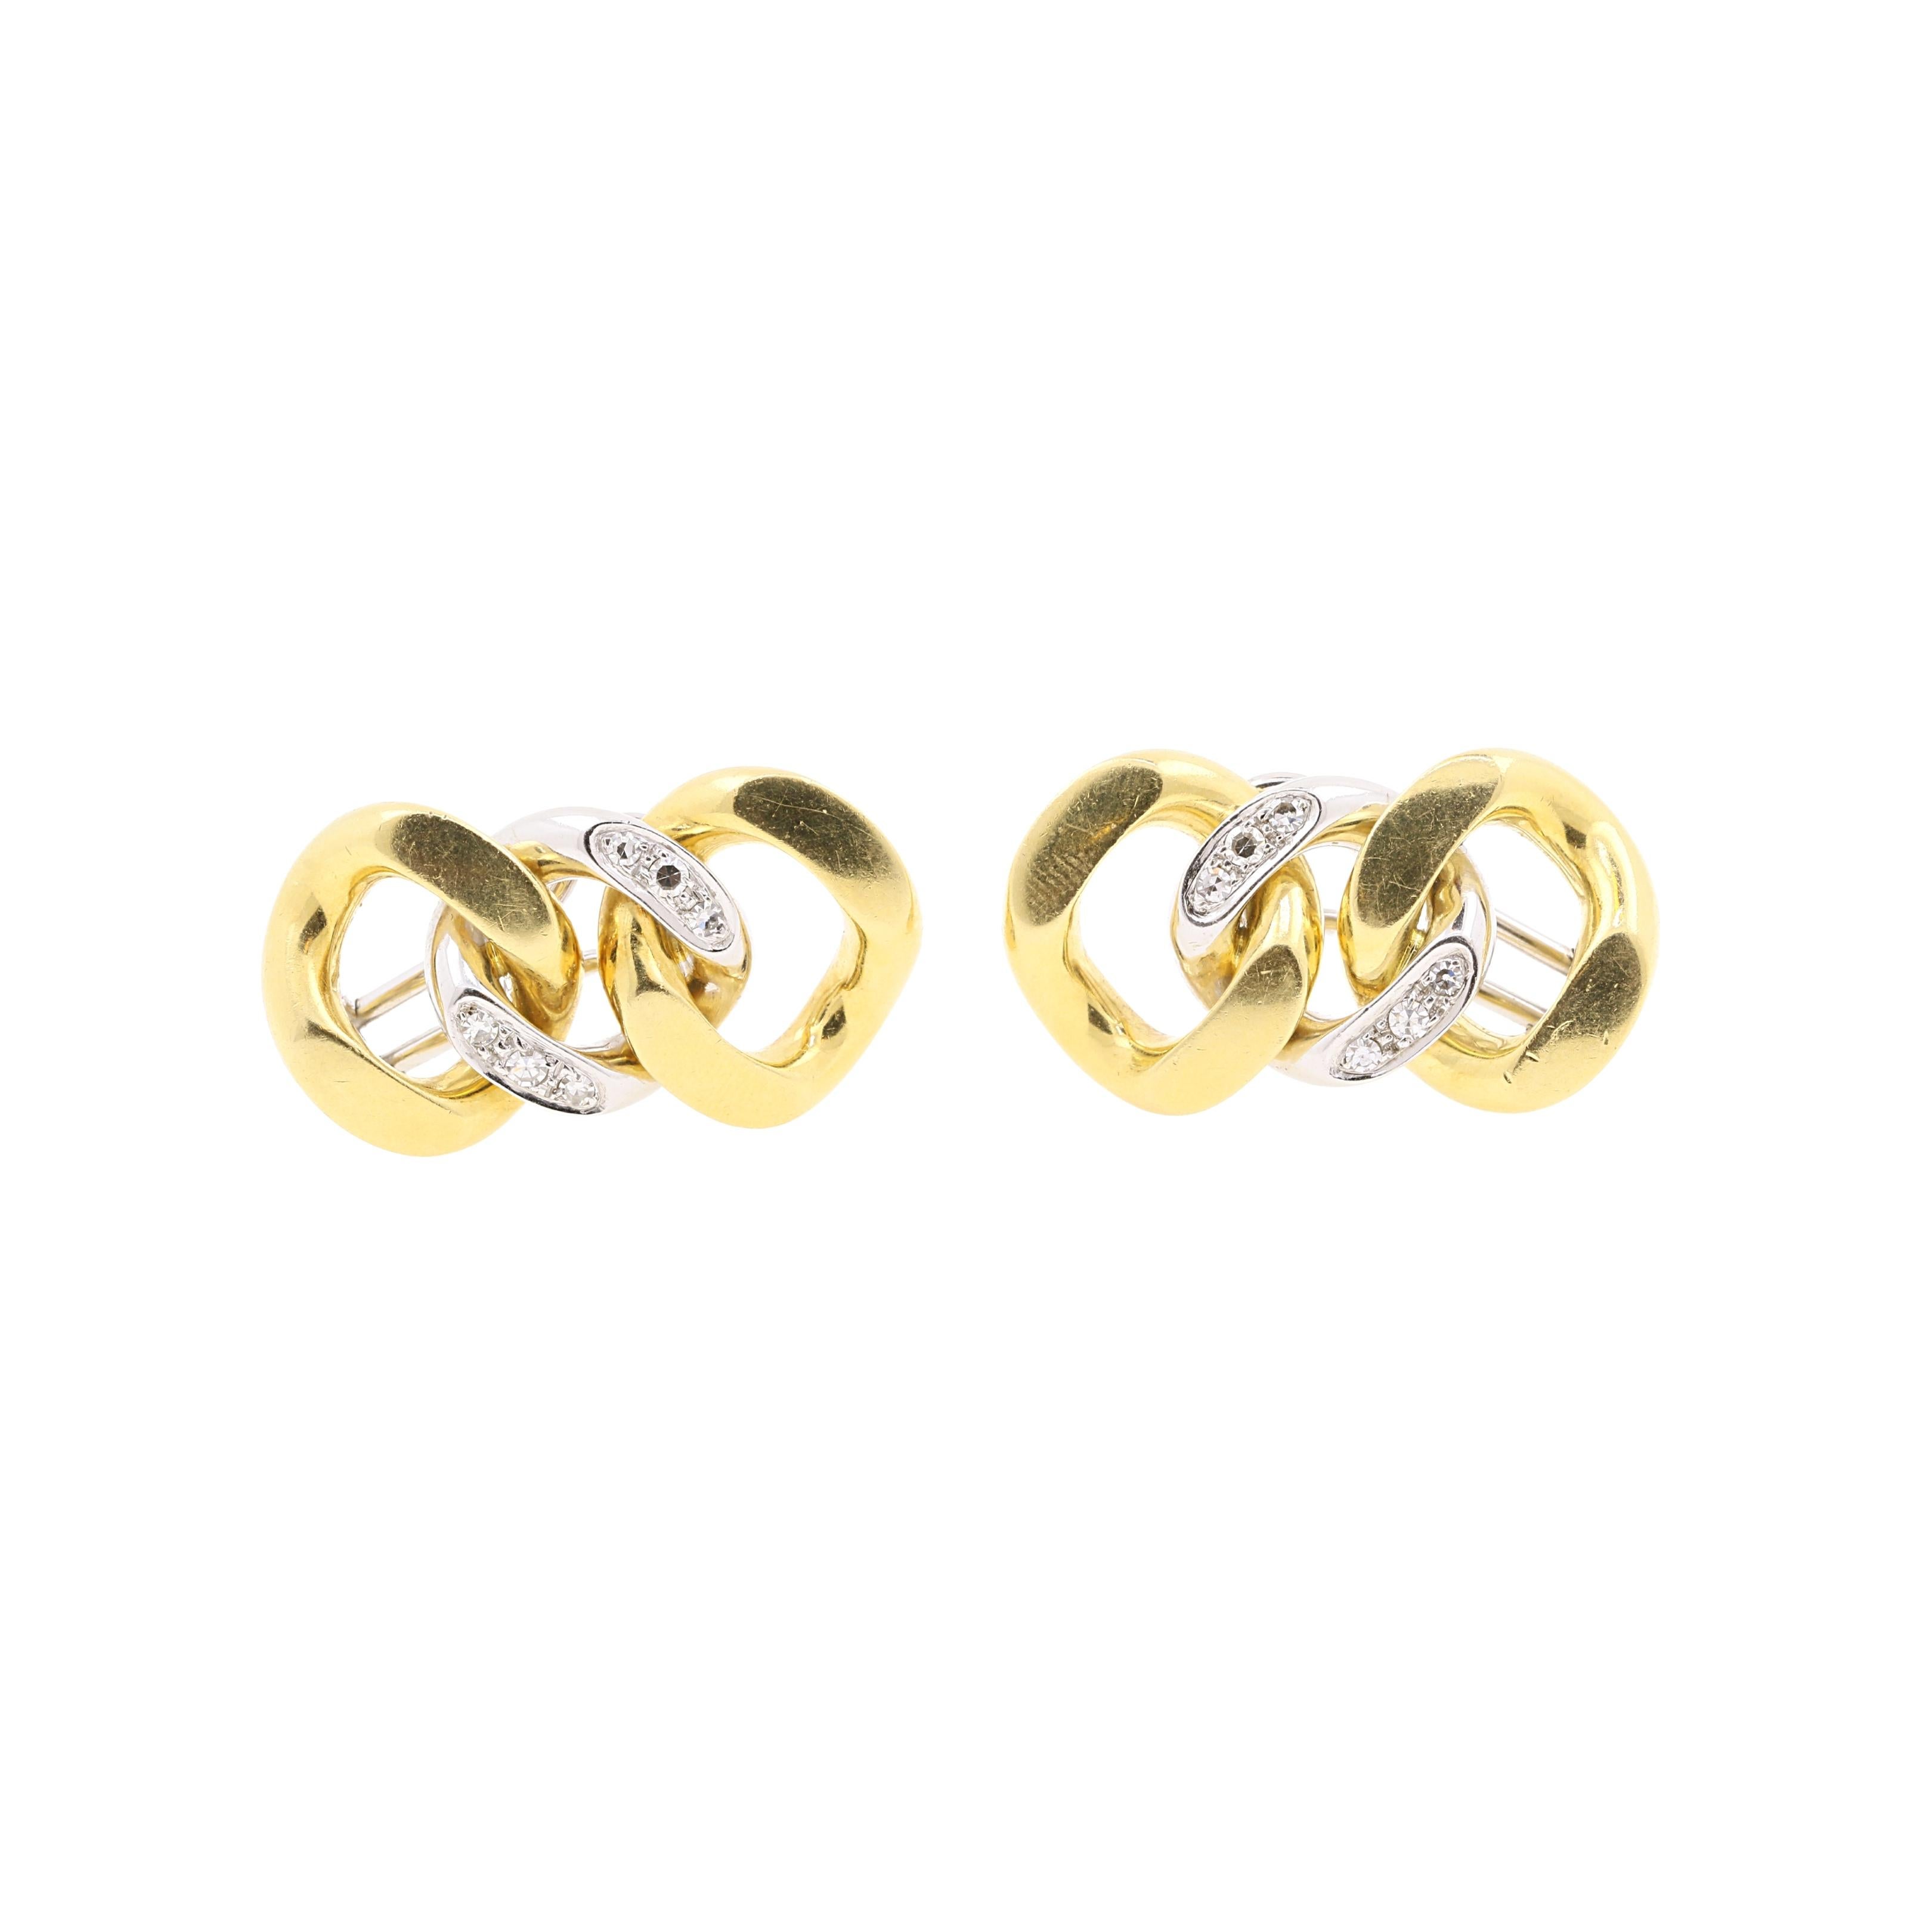 An iconic Pomellato pair of earrings straight from the brand early beginning!
18k Yellow and White gold Earrings with diamonds. 
Earrings composed by three 